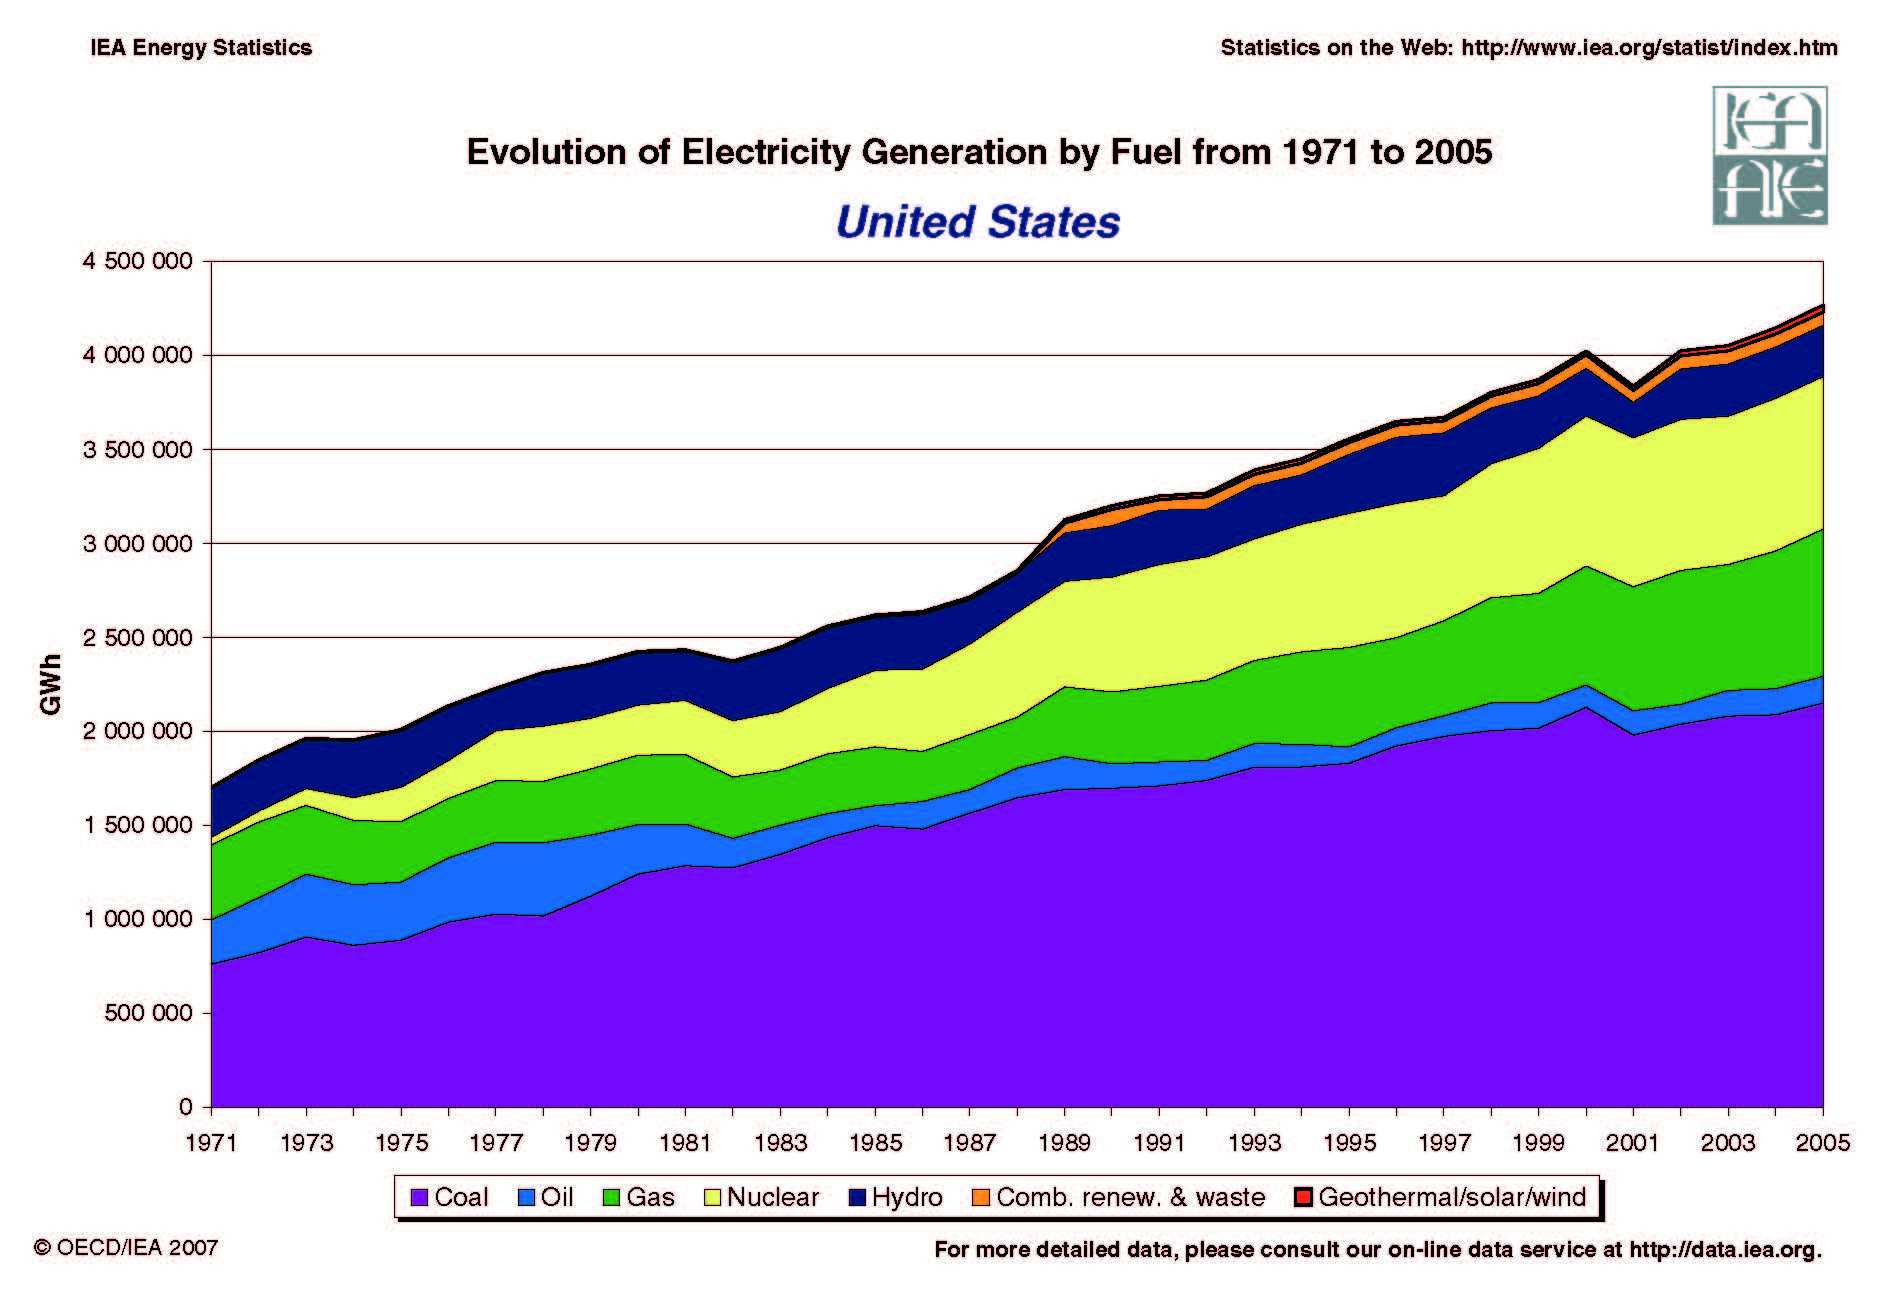 United States Evolution of Electricity Generation by Fuel 1971 - 2005